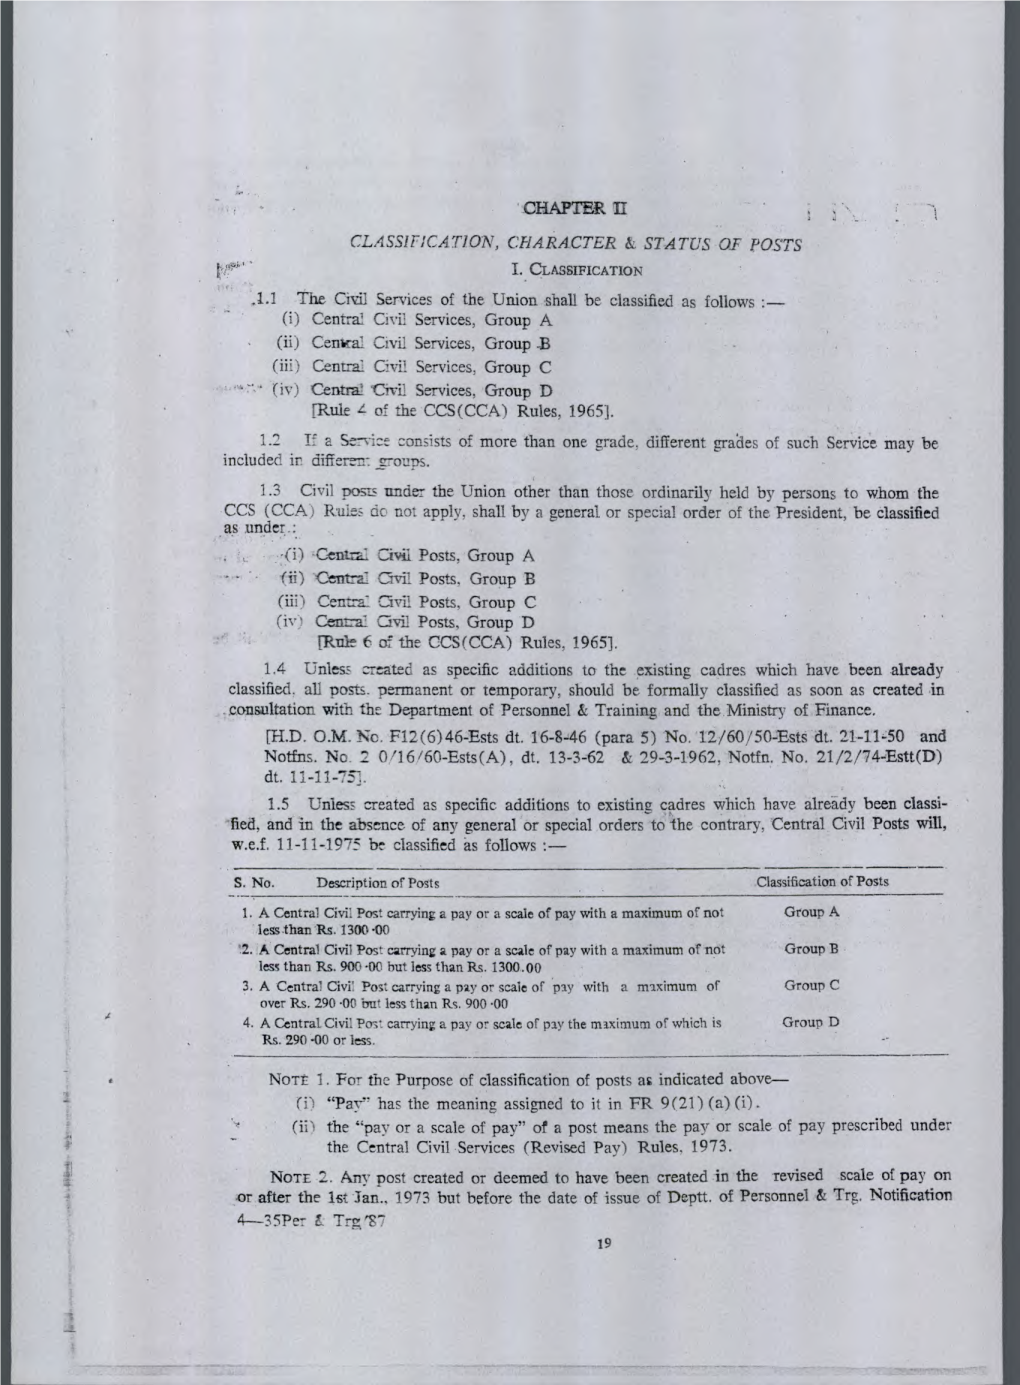 ' CHAPTER 11 .1.1 the Civil Services of the Union Shall Be Classified As